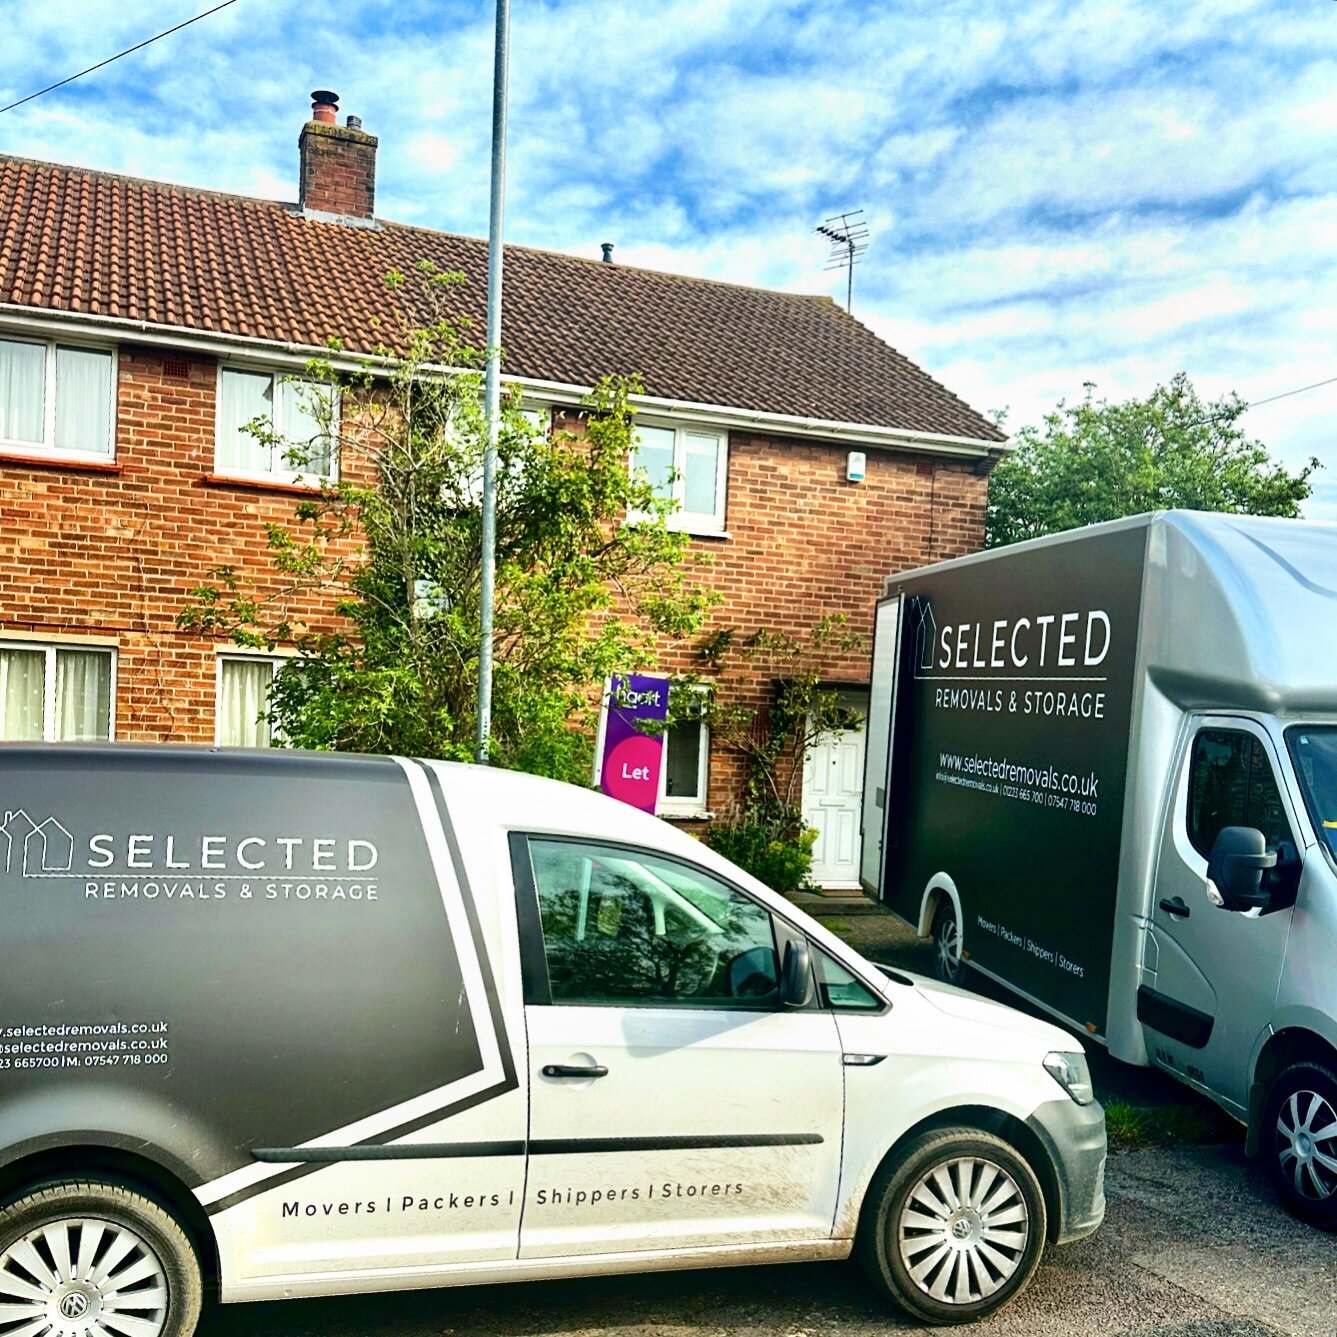 Off to Chelmsford today for the final move of the week&hellip;. and what a week it&rsquo;s been!

Recovery day tomorrow, we go again Monday 💪

Have a great weekend everyone!

#moving #moves #removals #cambridge #storage